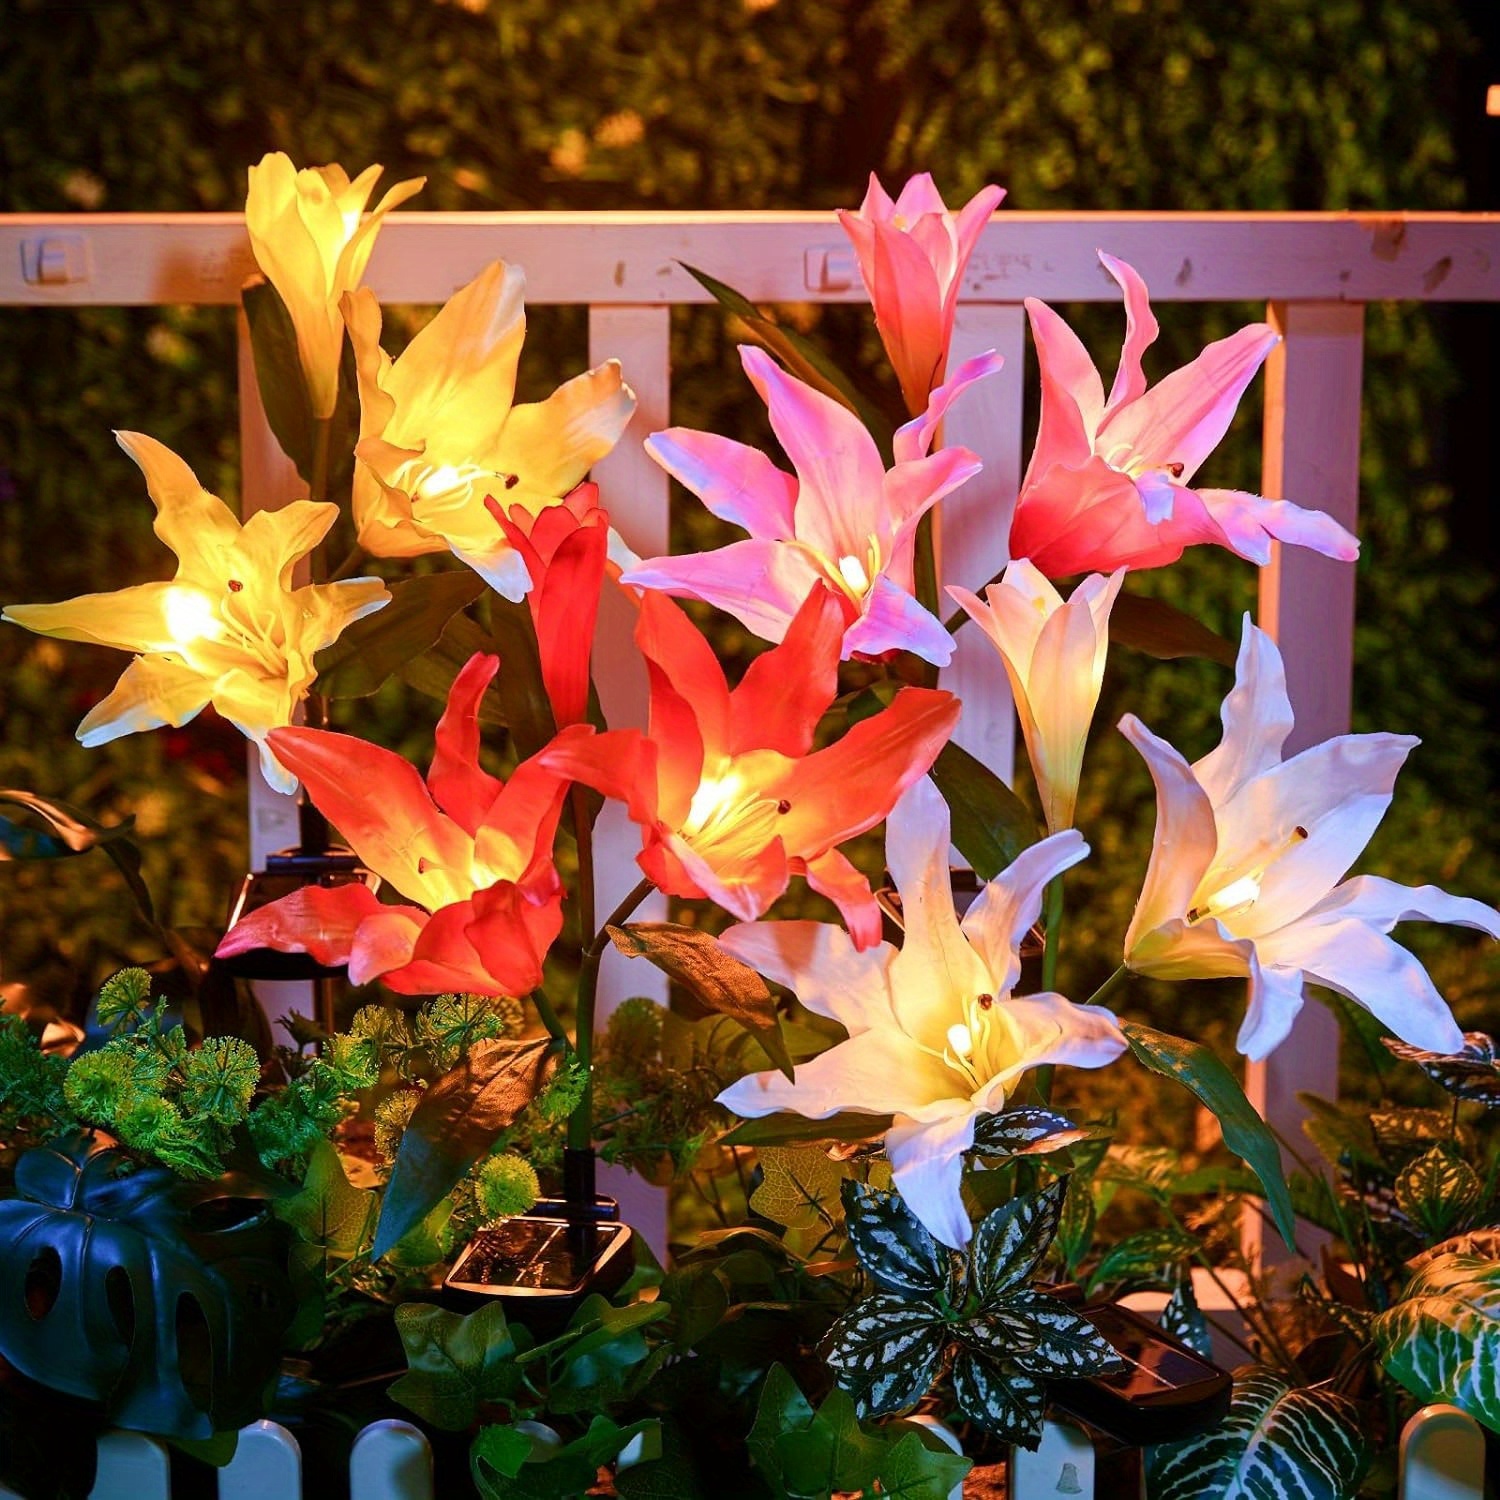 

Brightown 4 Pack Led Solar Flower Lights With Larger & More Realistic Lily, Bigger Solar Panel, Waterproof Solar Lights For Outside Yard Patio Garden Decorations